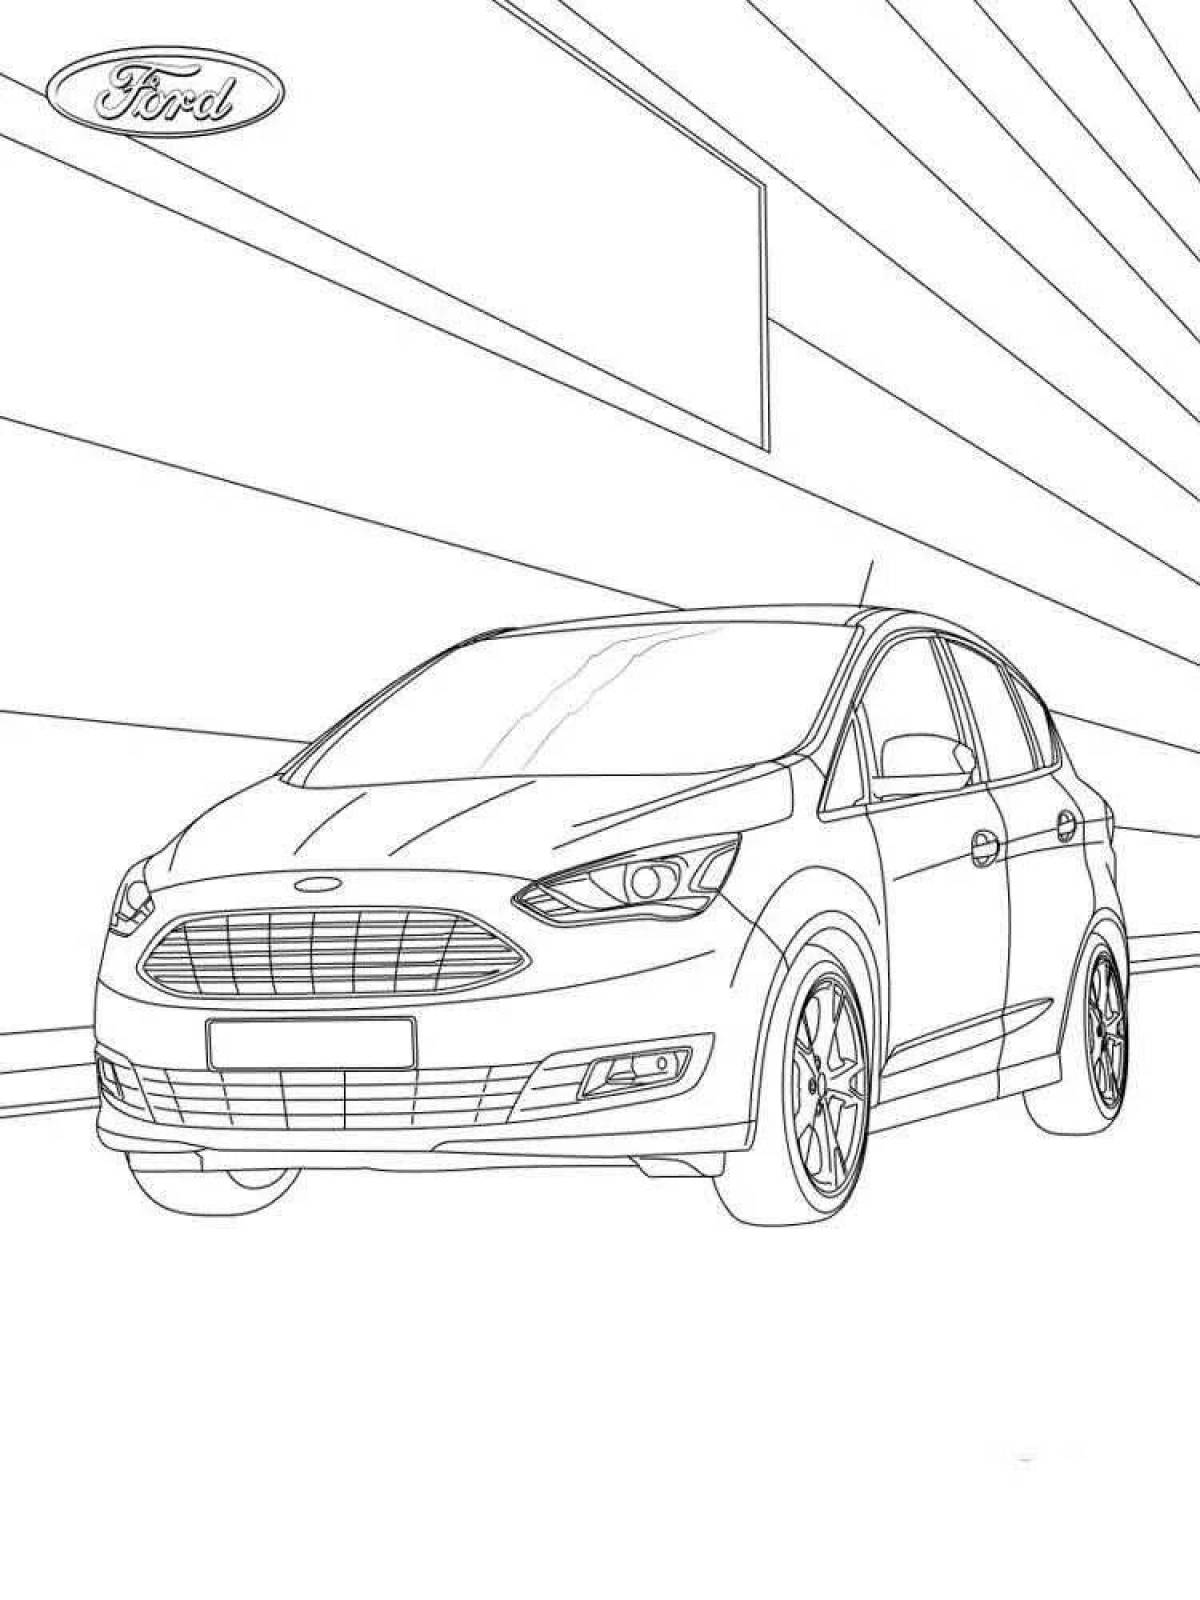 Amazing ford focus coloring page